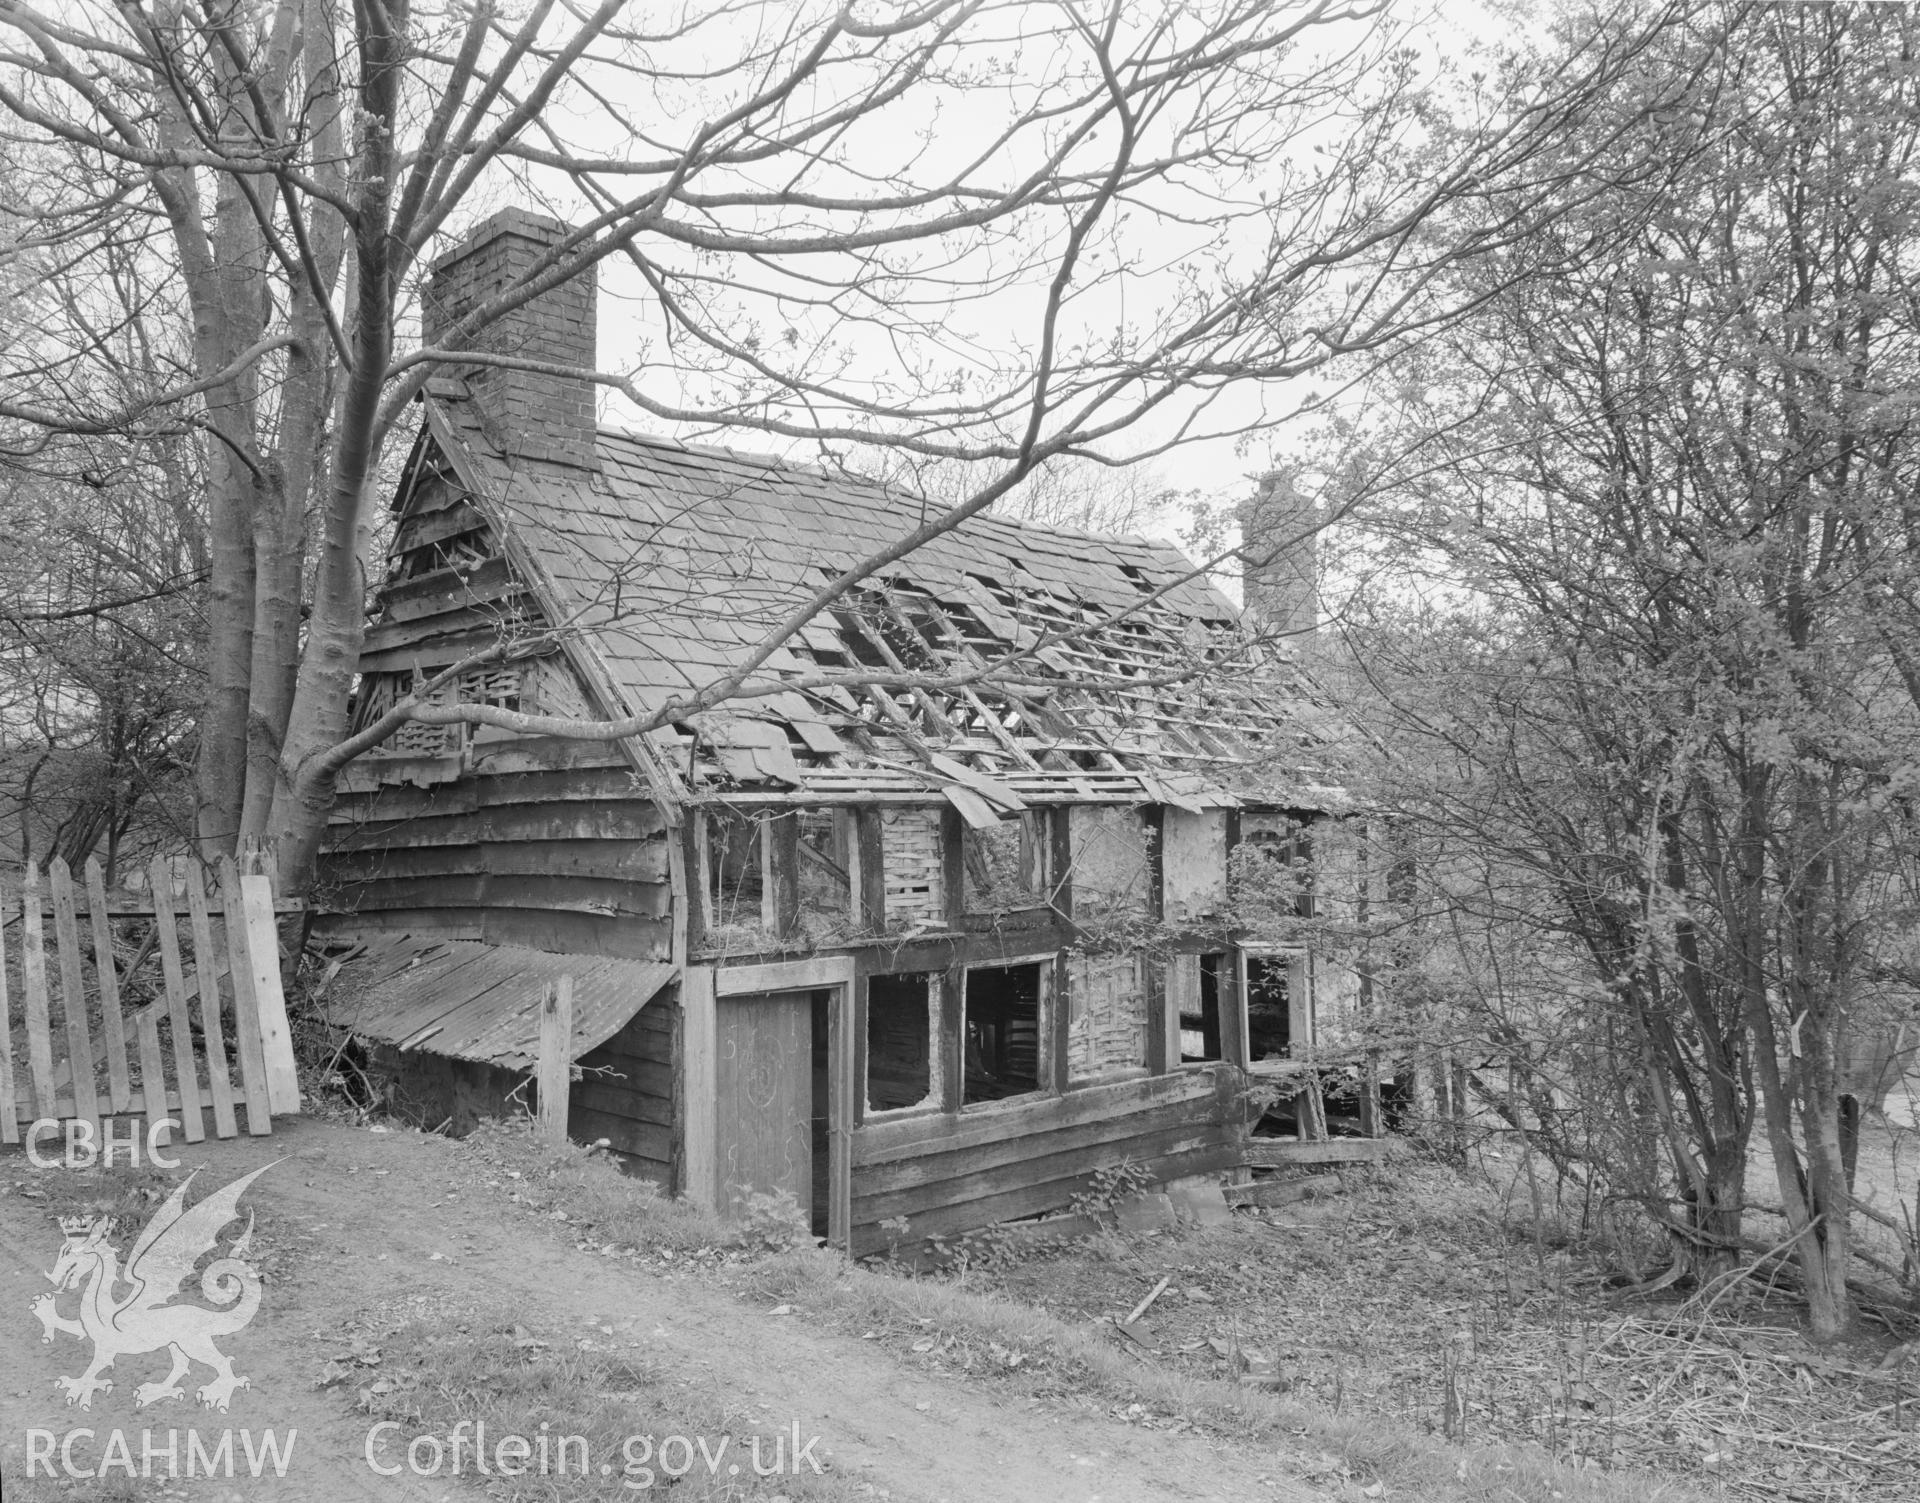 Black and white acetate negative showing an exterior view of Ty Brith.